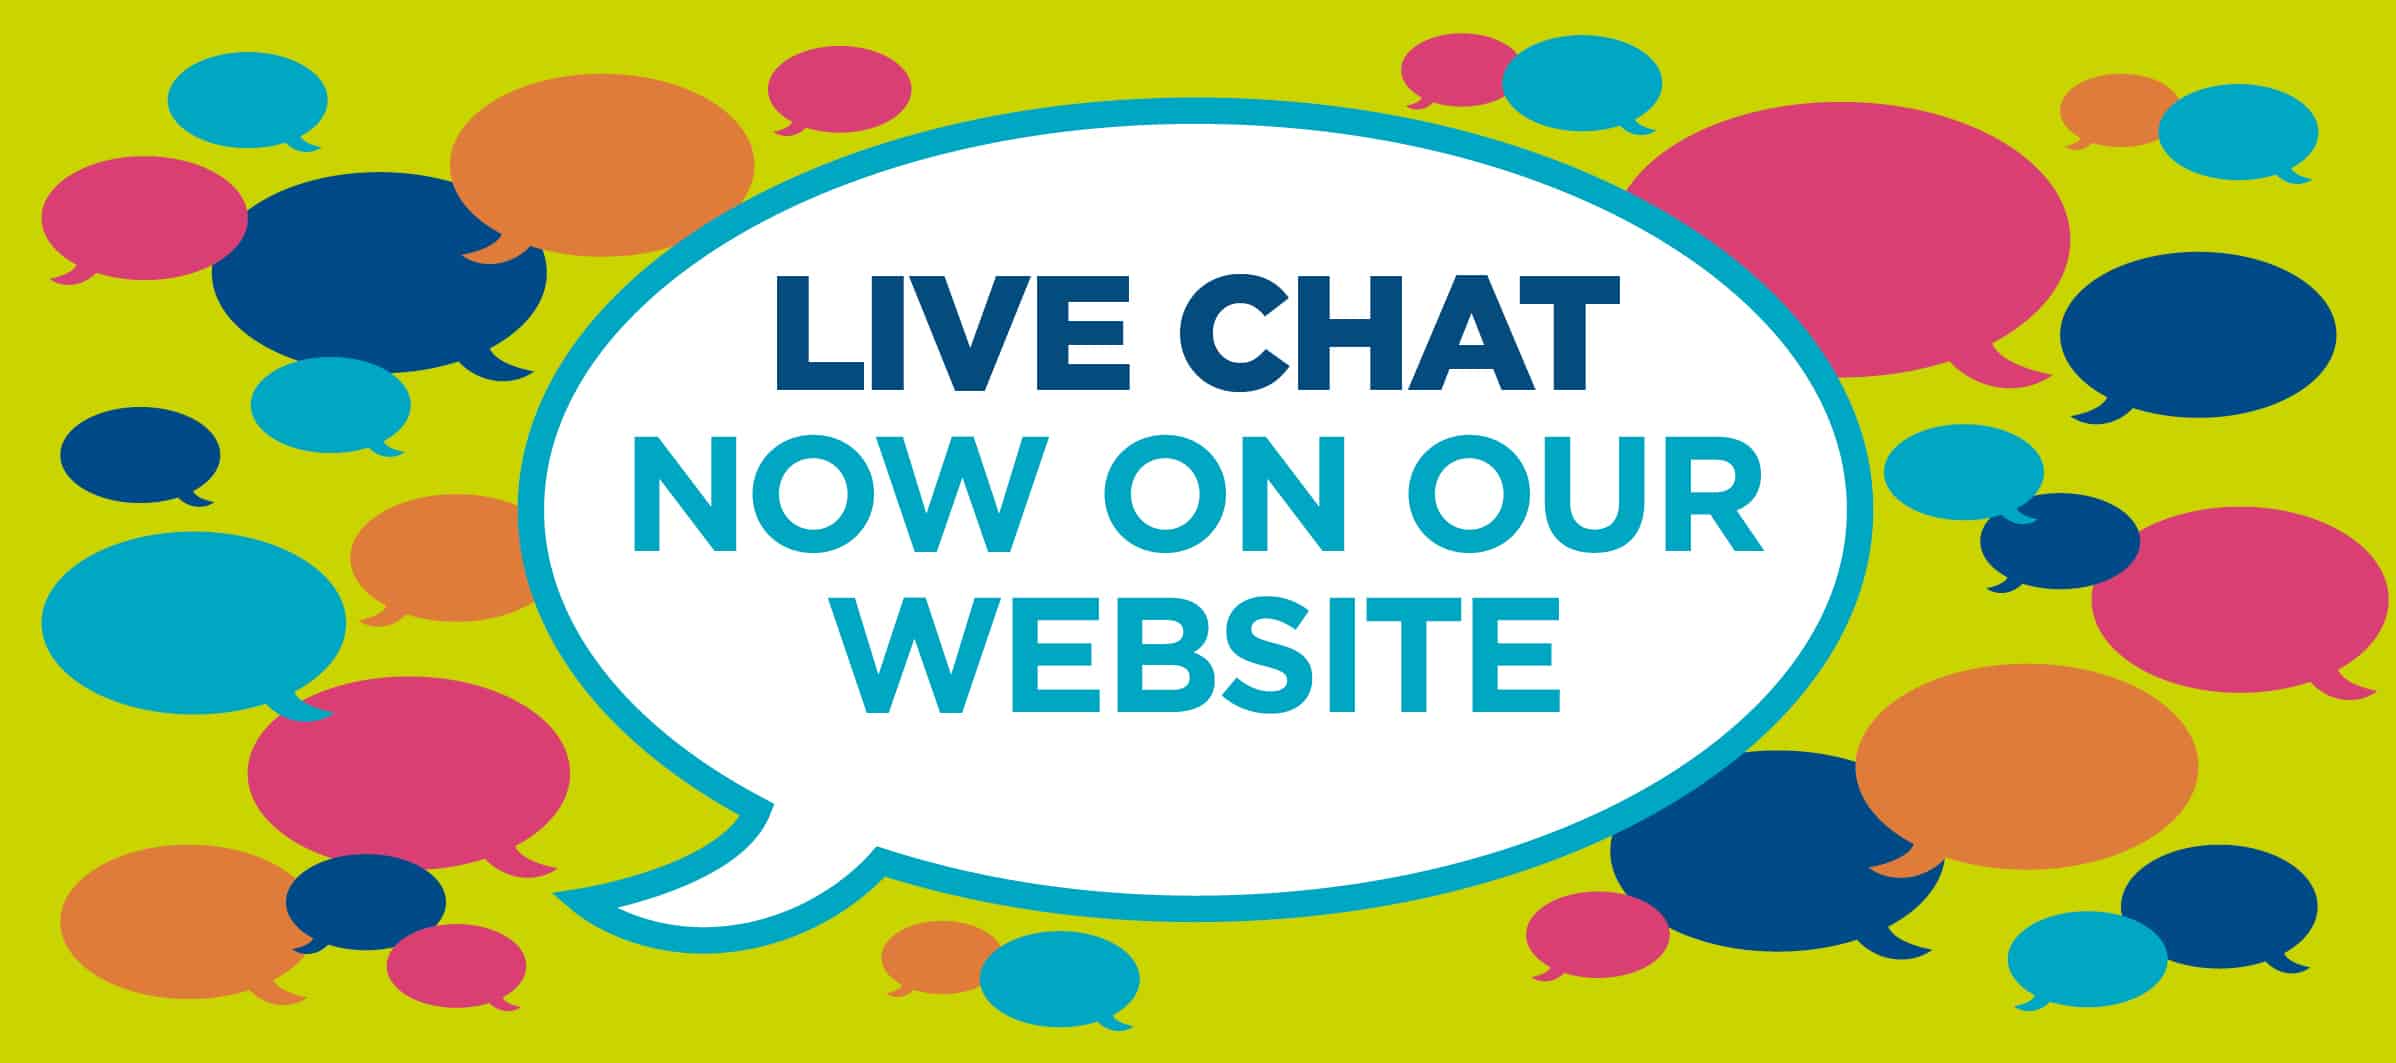 Live chat now available on our website